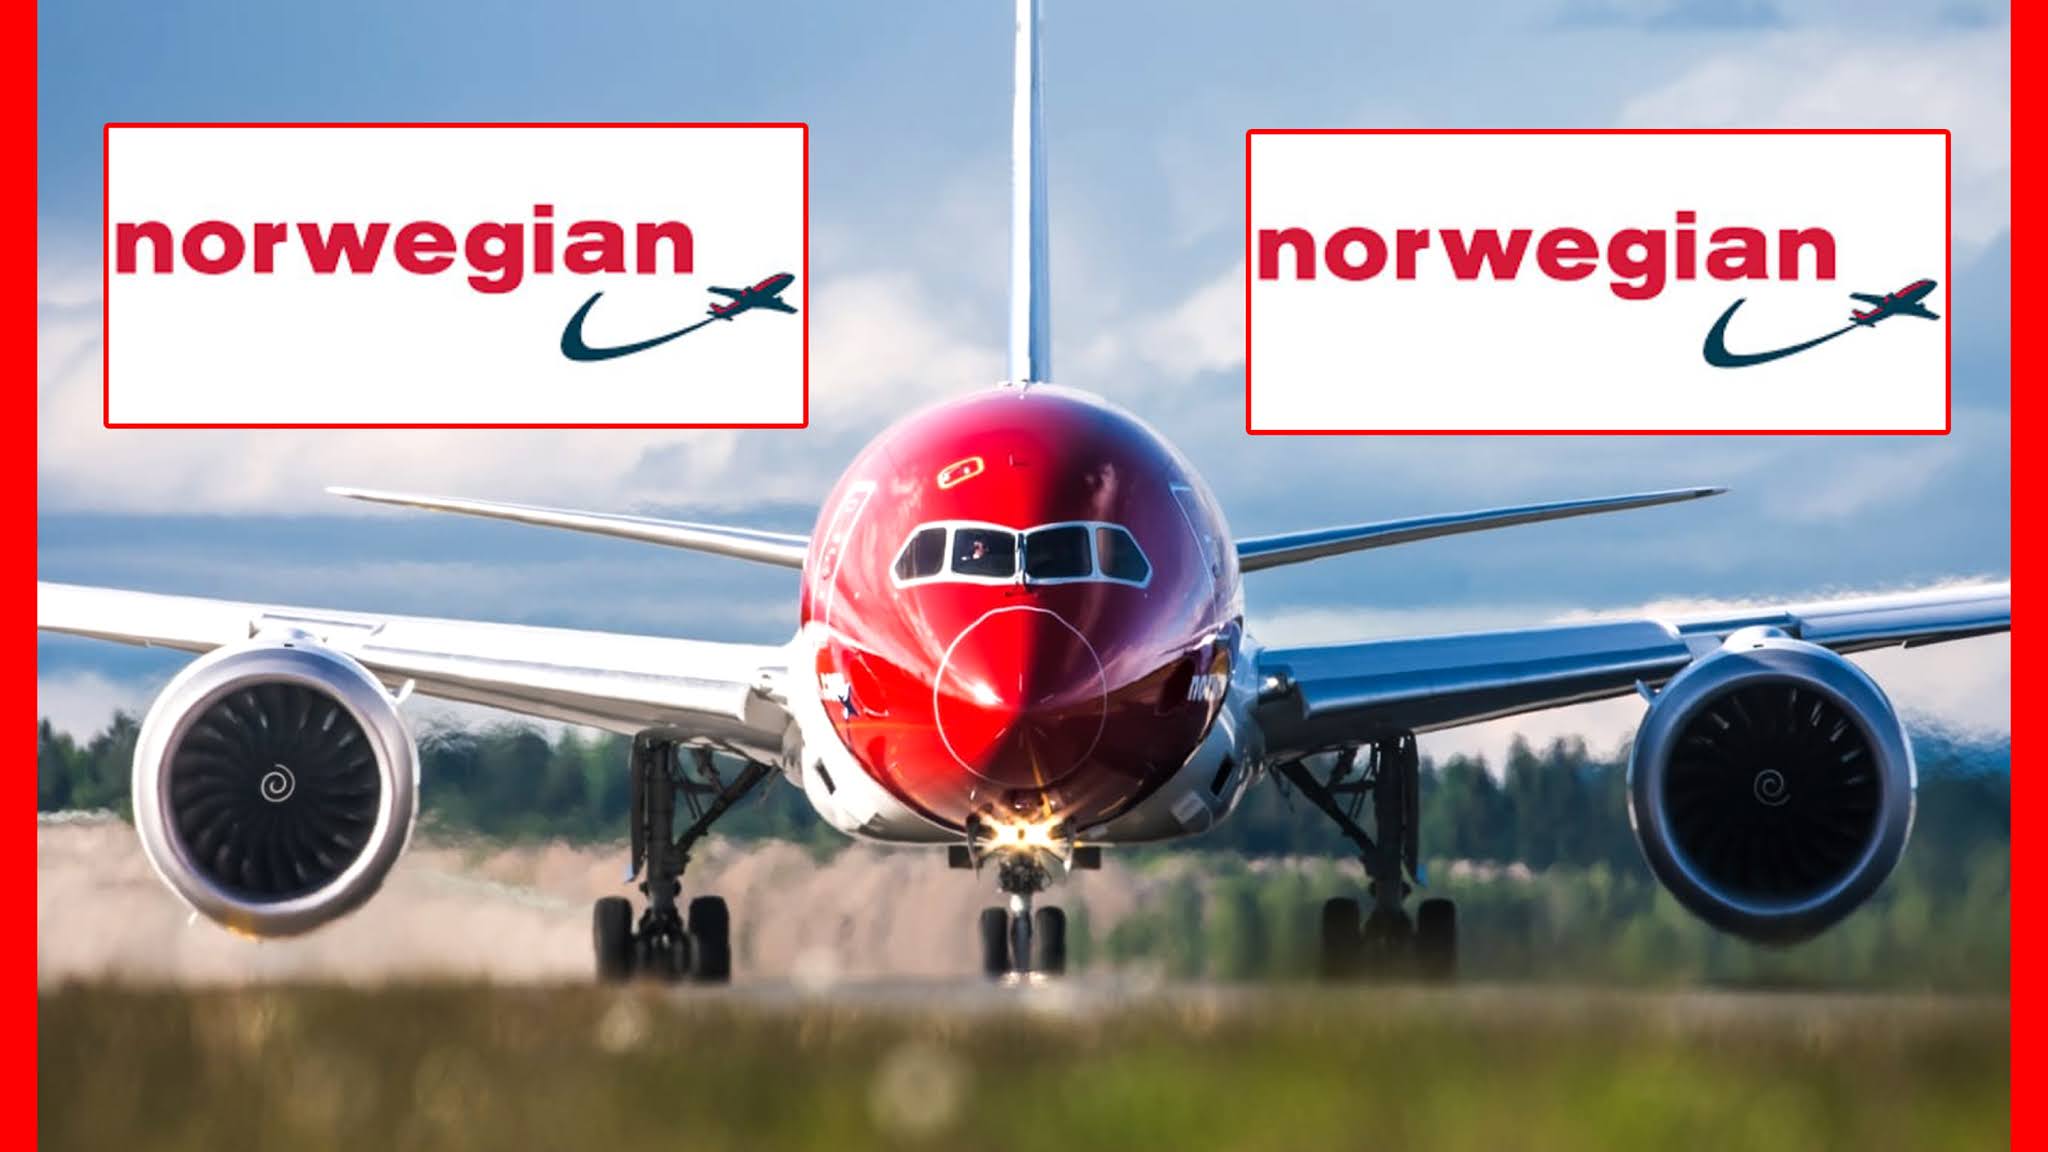 NORWAY SPECIAL REPORT: Norwegian Air ends its long-haul service